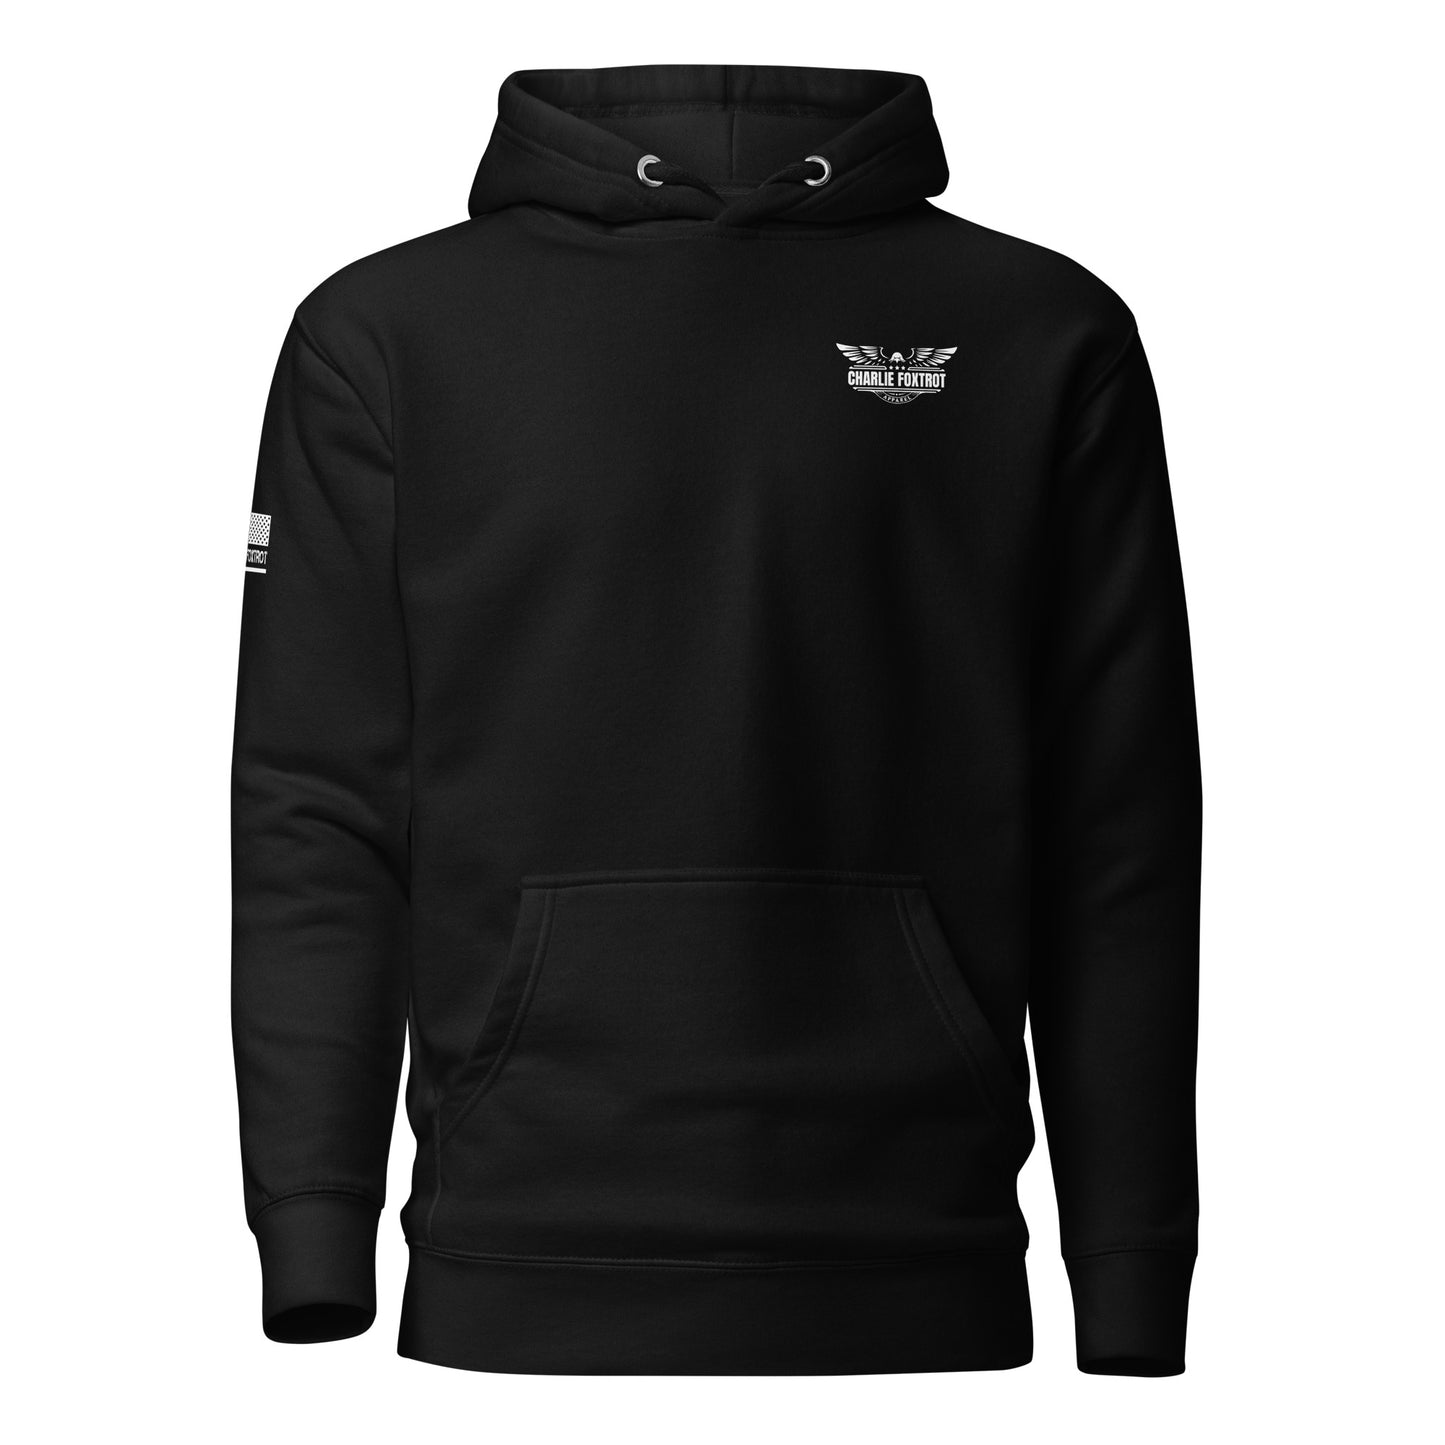 Road Is Closed Let's Go See Why Unisex Hoodie